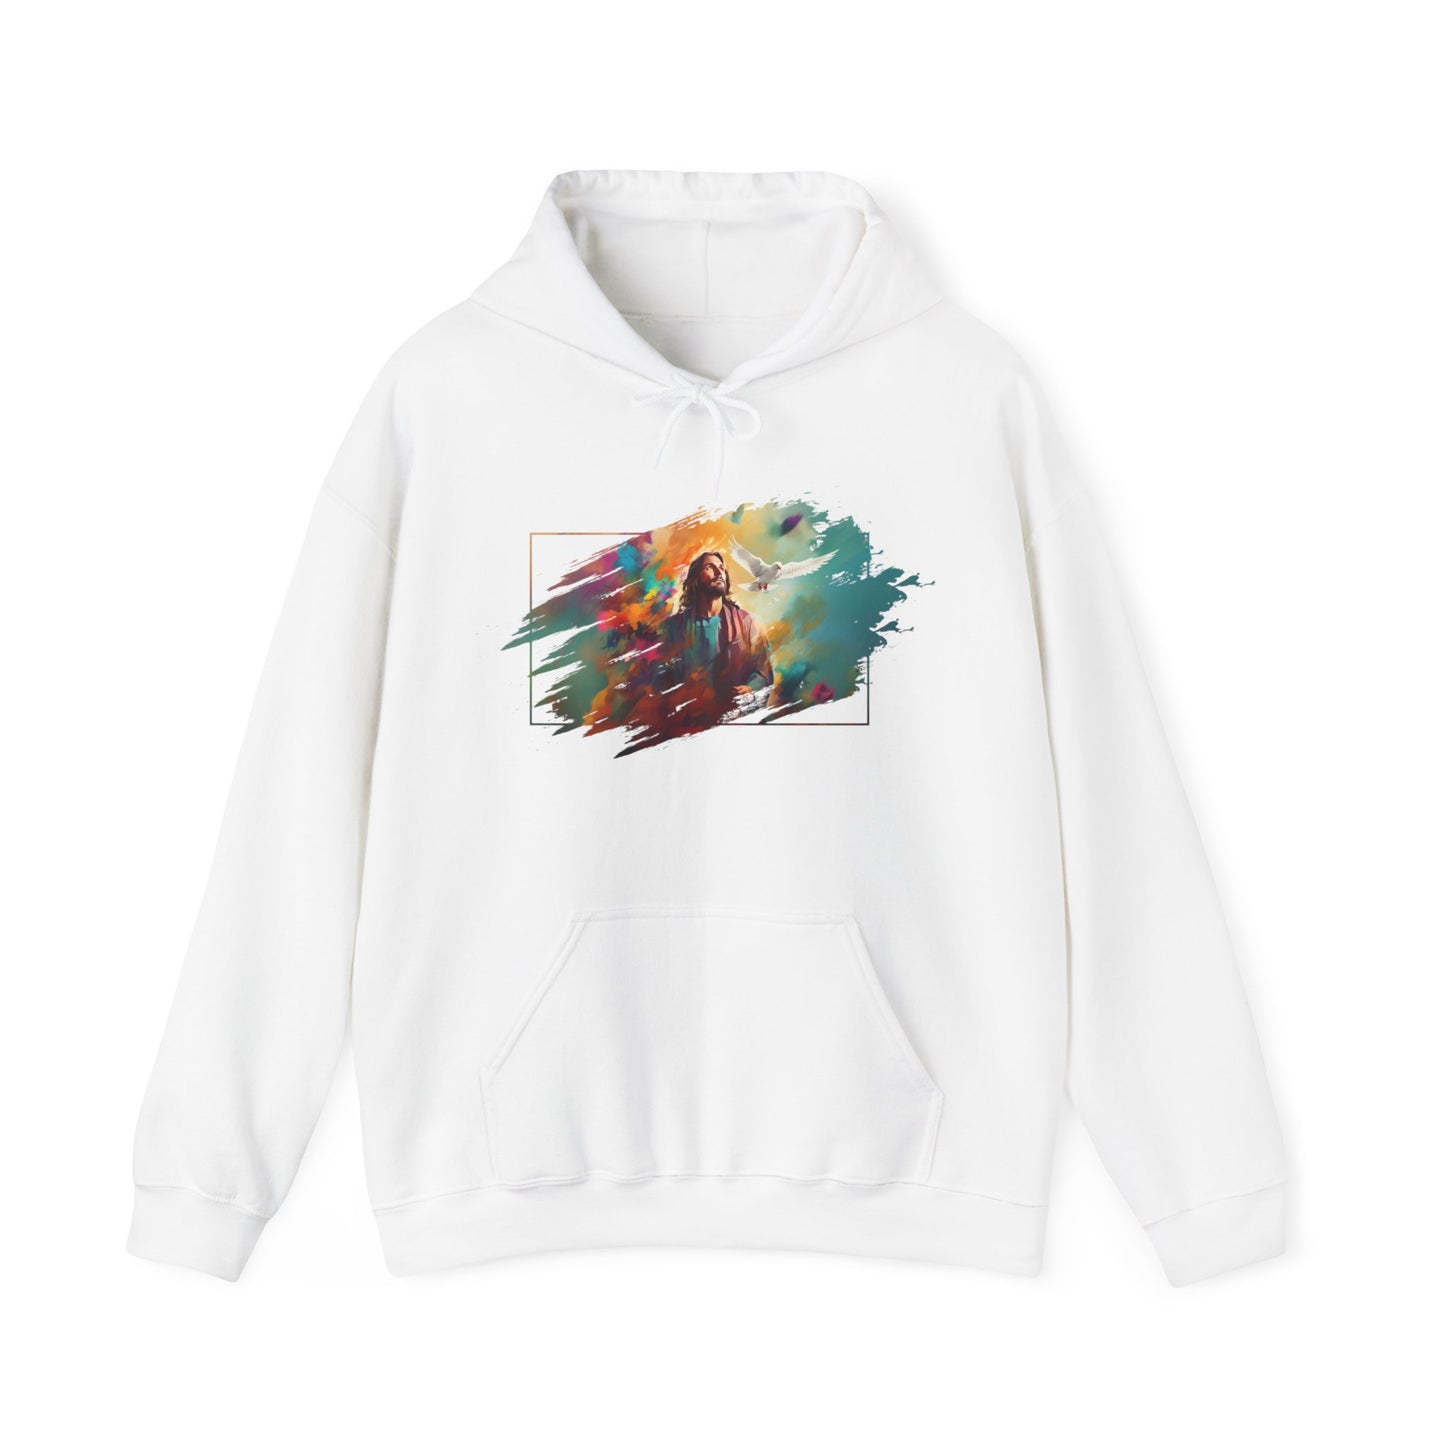 THE ANOINTED ONE Hoodie